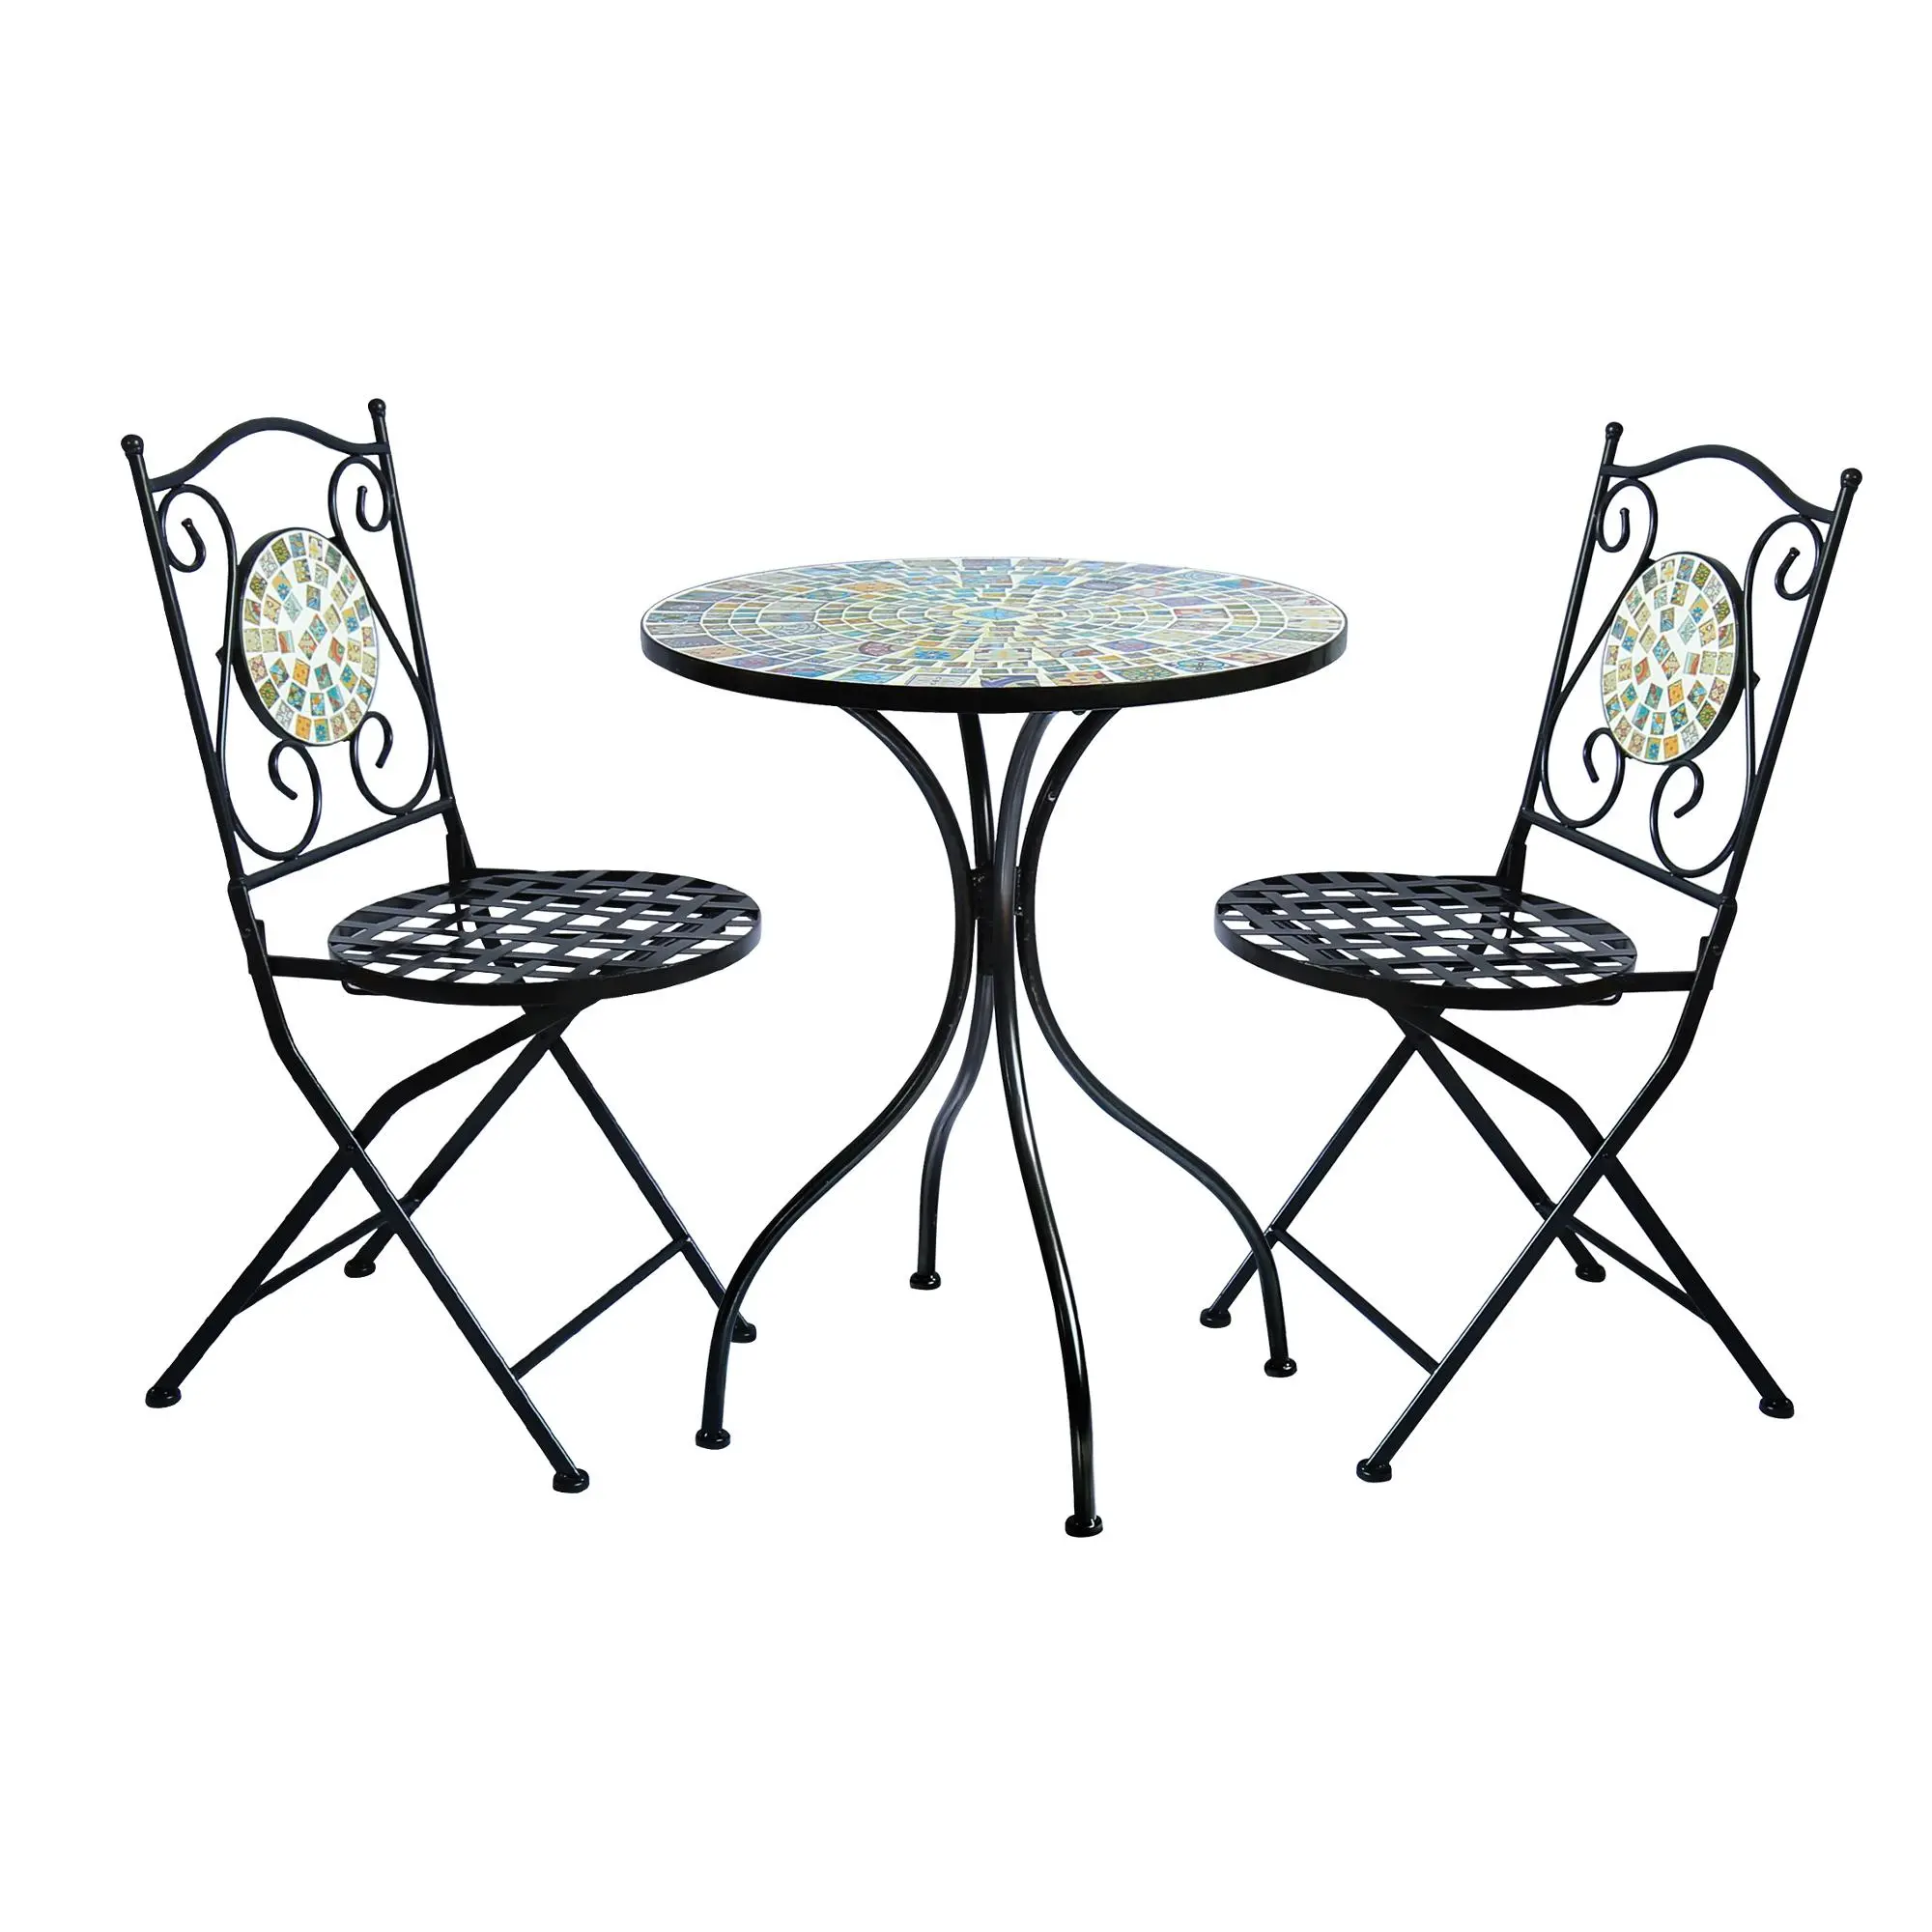 Royal Hand Made Mosaic Bistro Set Stone Dining Table and Chair 3 Piece